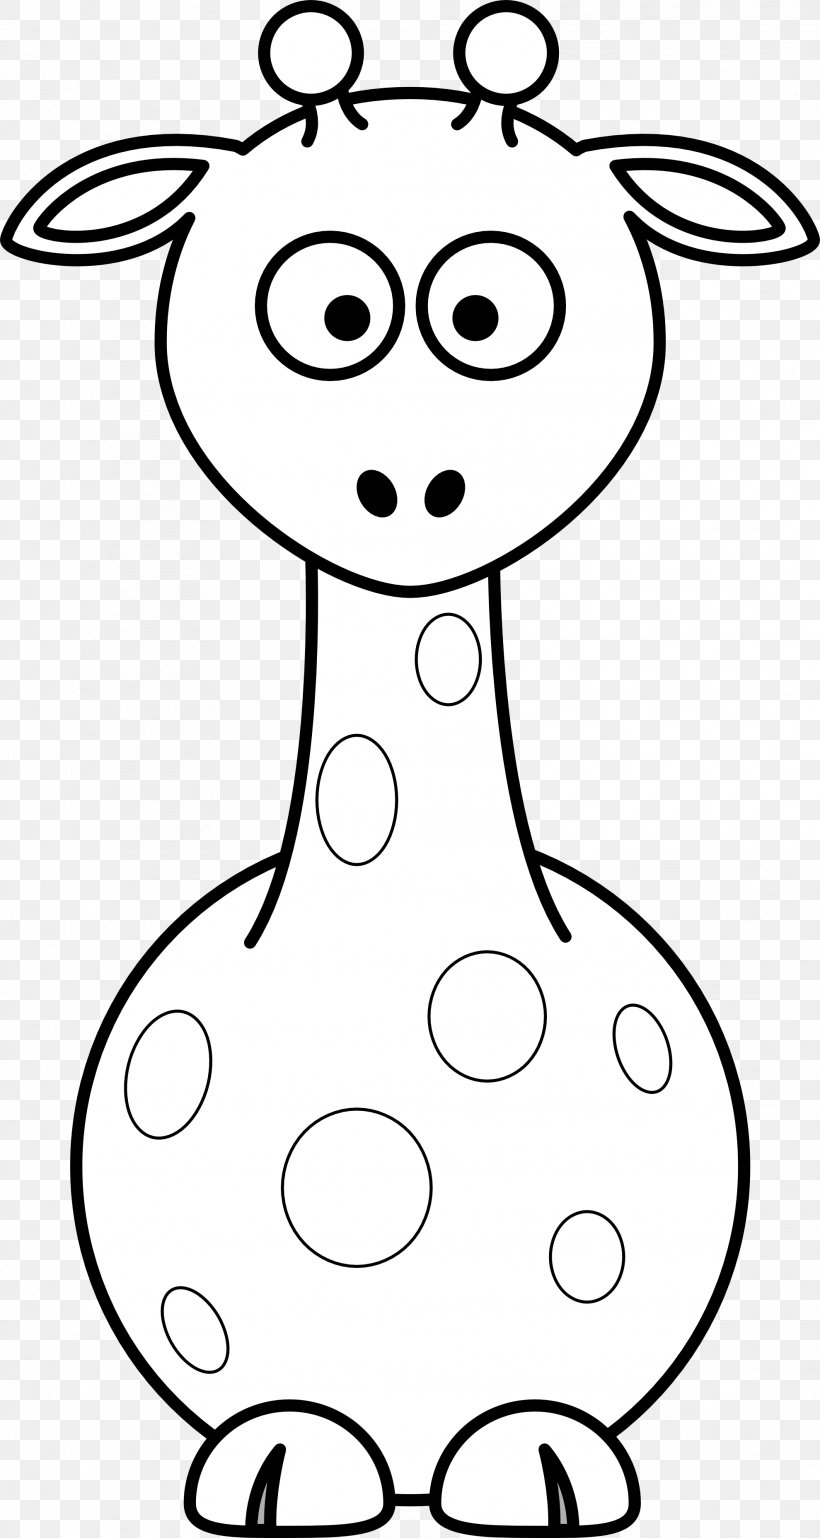 Coloring Book Giraffe Drawing Cartoon, PNG, 1979x3713px, Coloring Book, Art, Black, Black And White, Cartoon Download Free